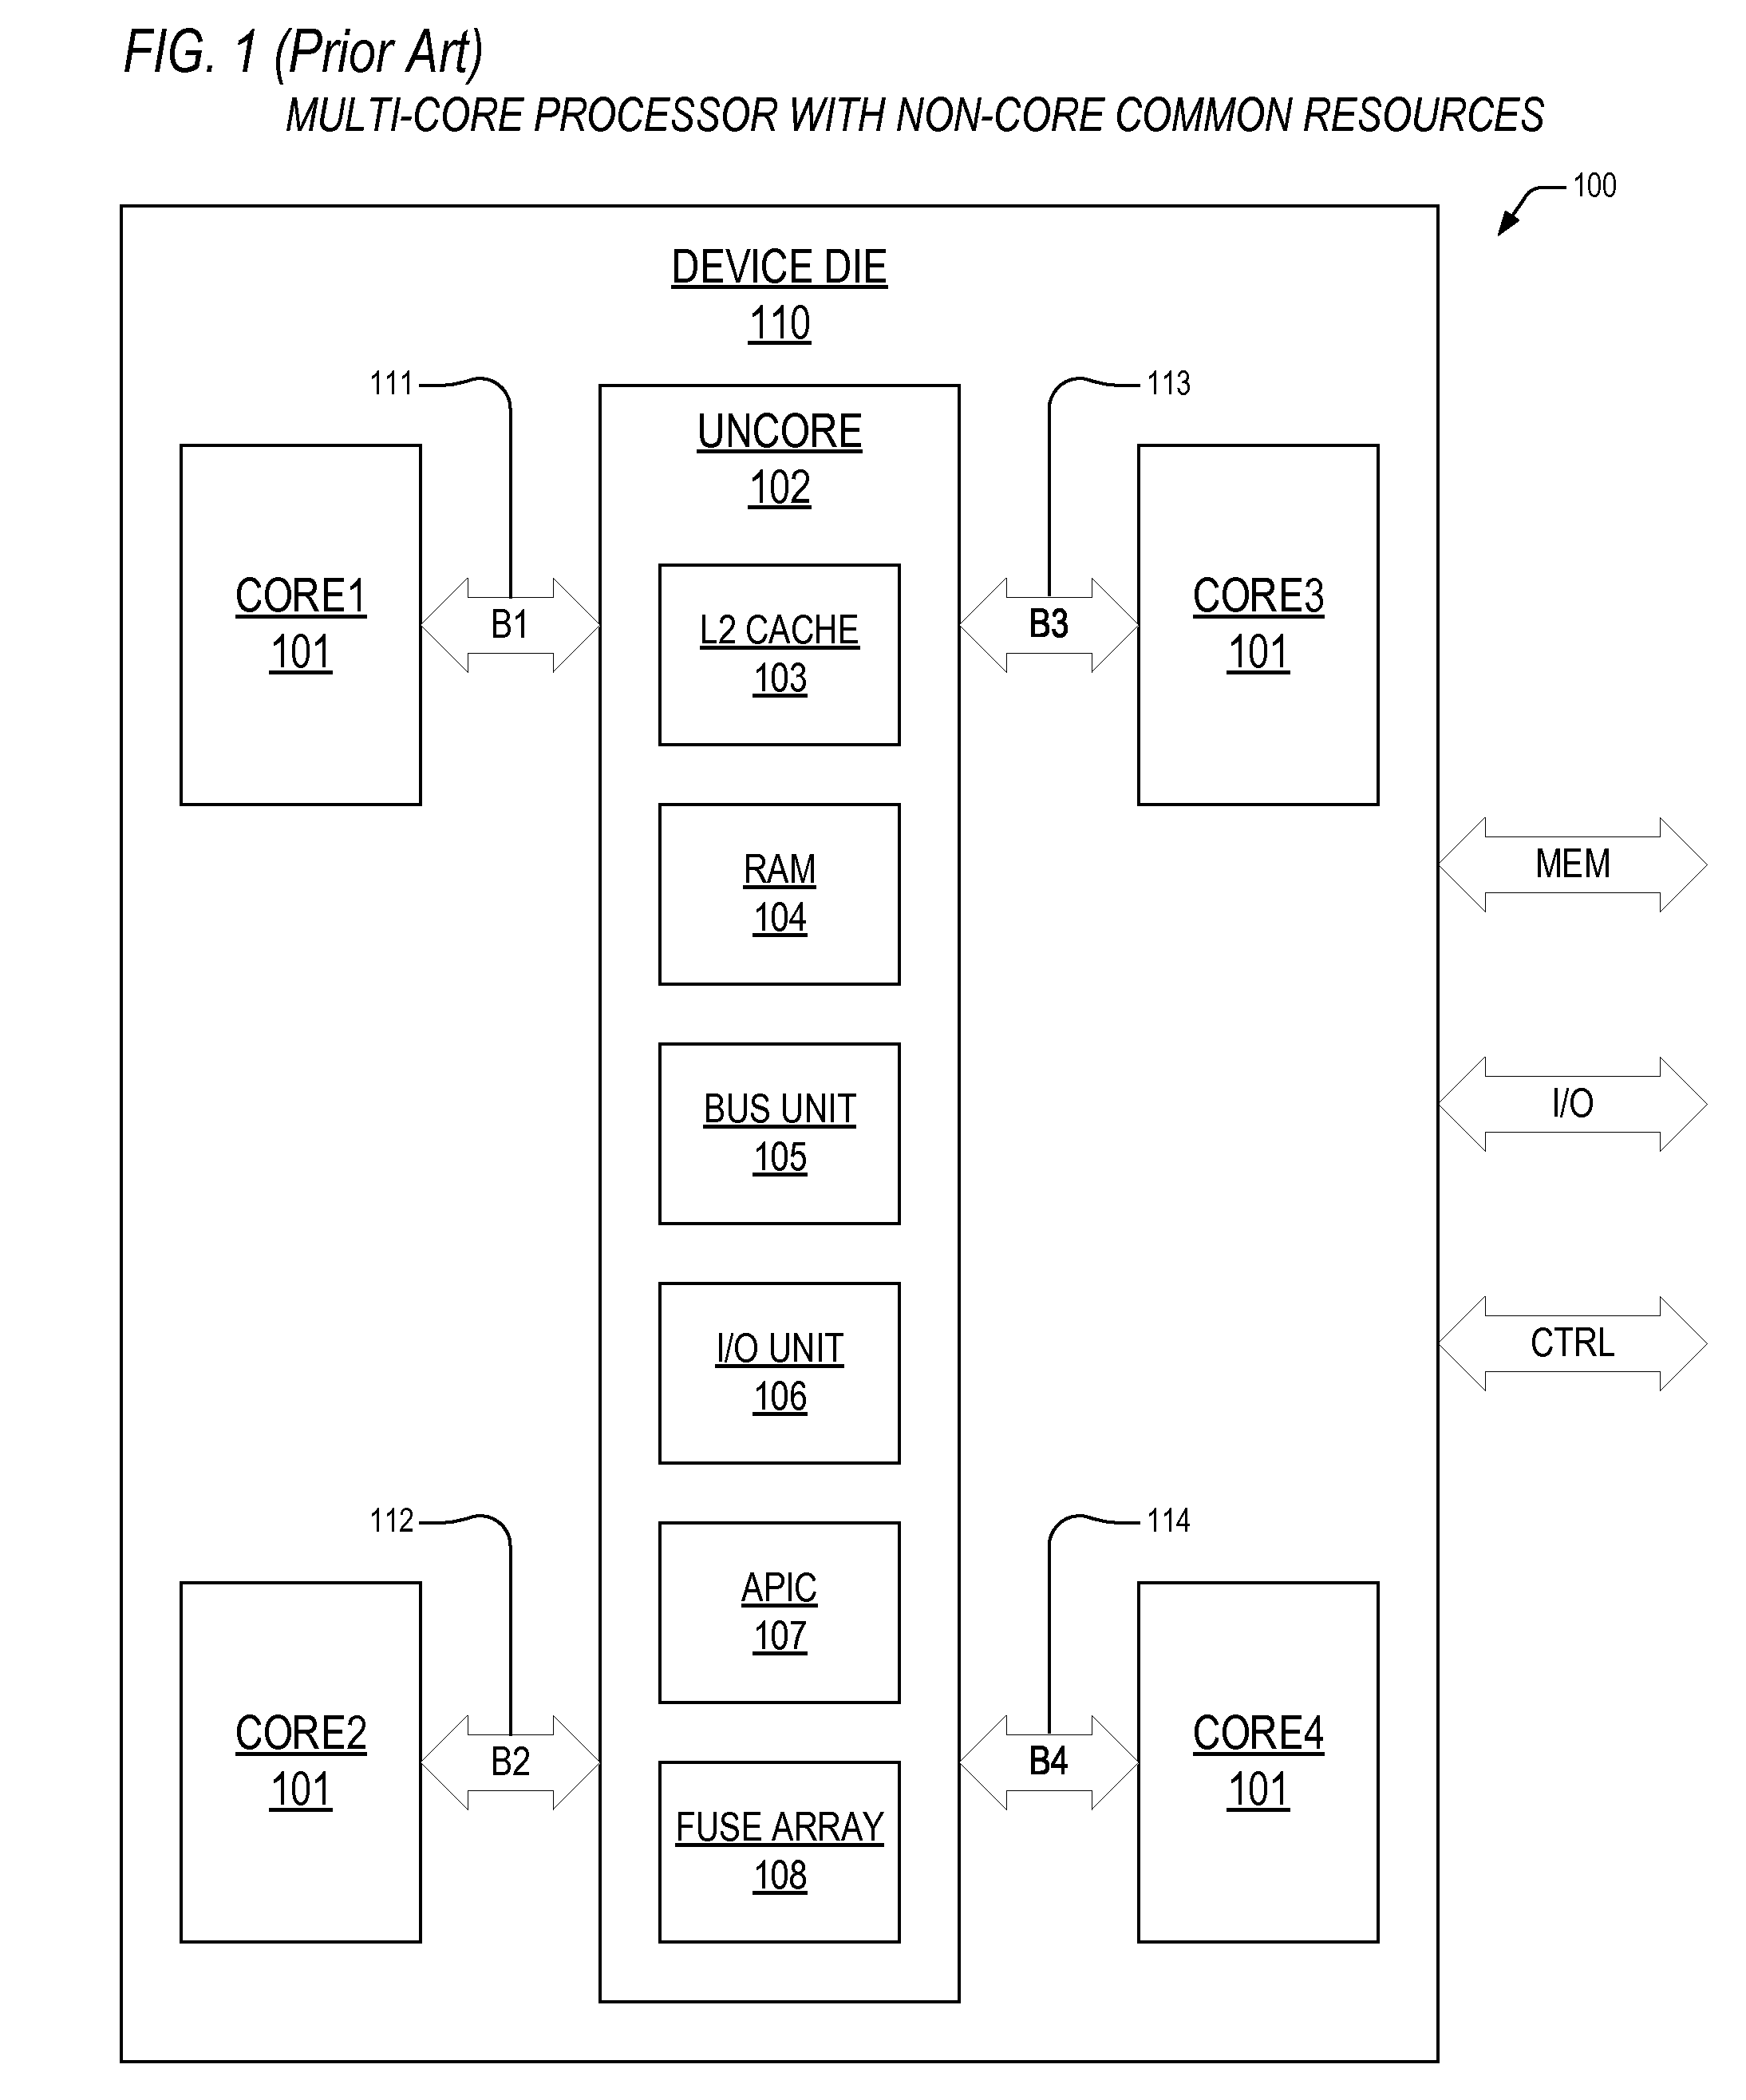 Power saving mechanism to reduce load replays in out-of-order processor